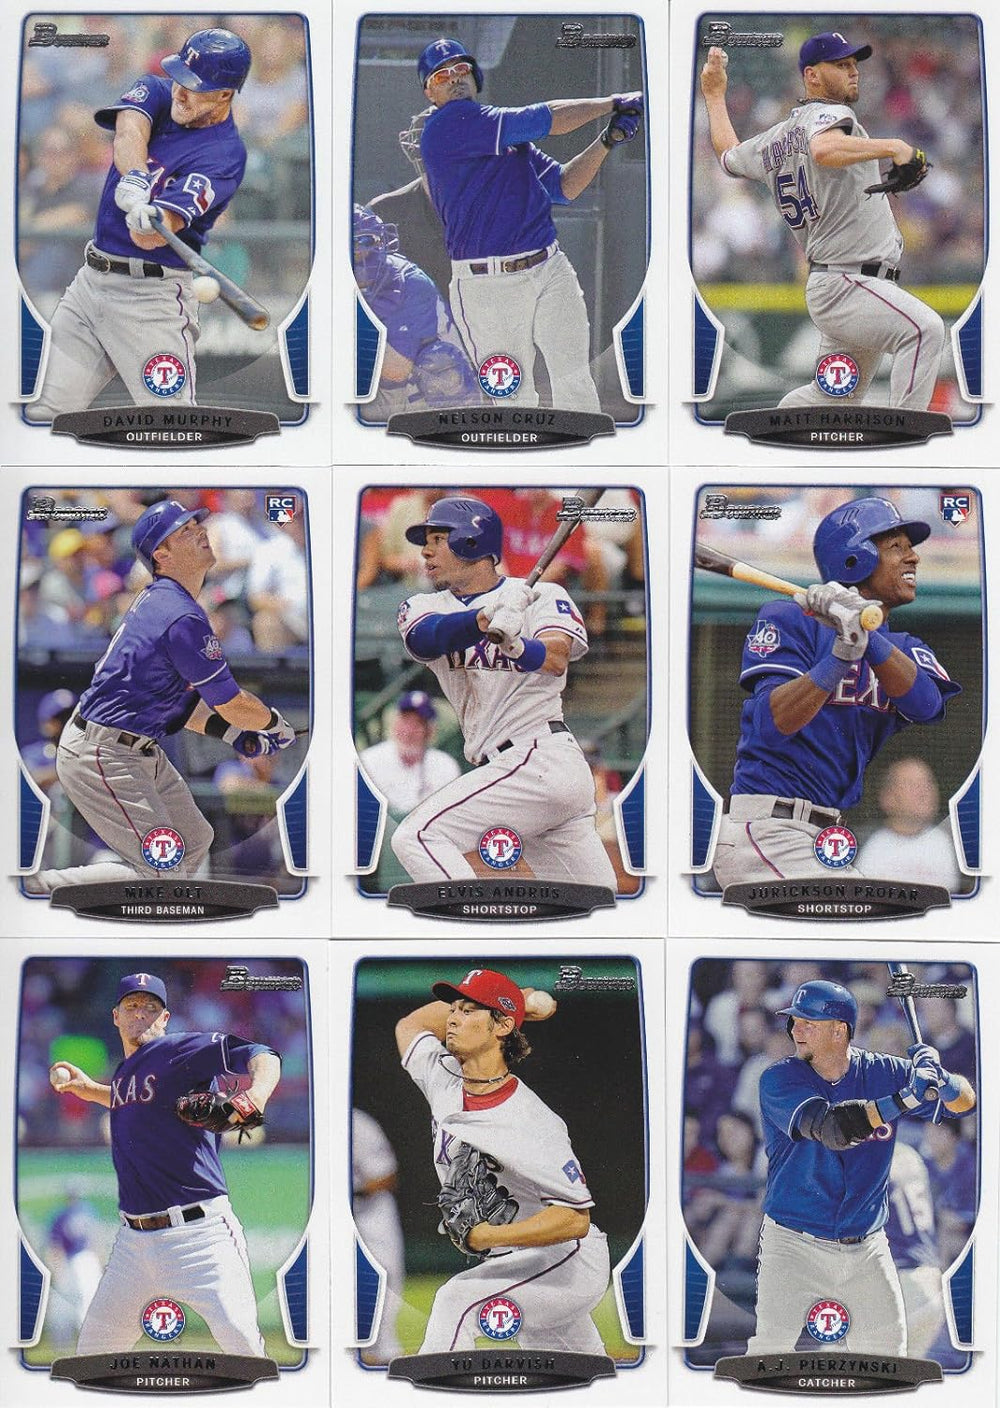 Texas Rangers 2013 Bowman Complete Mint 12 Card Team Set with Olt and Profar Rookies plus Darvish+!